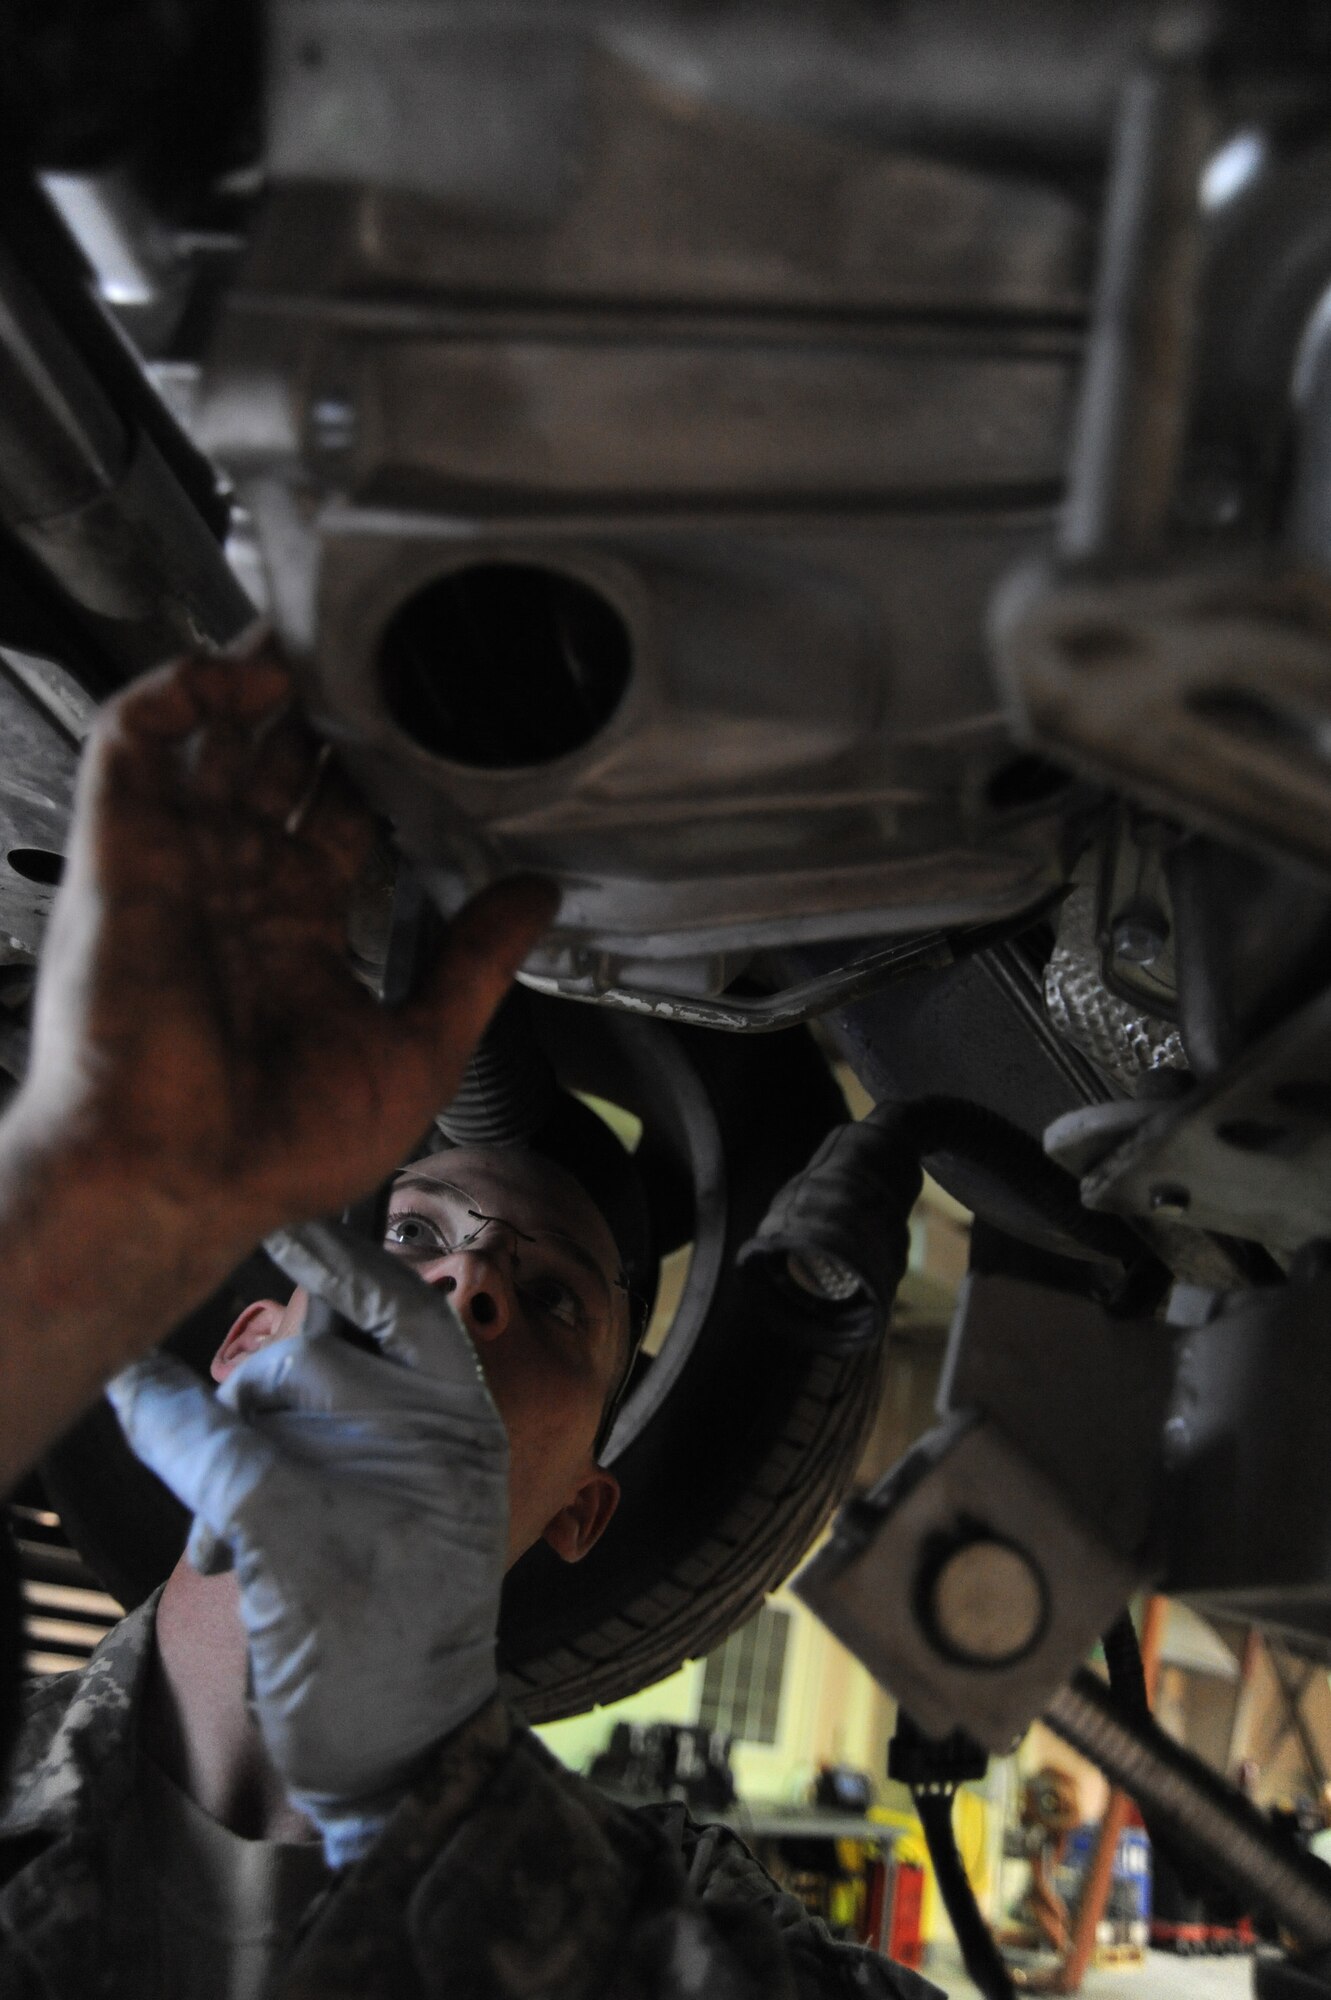 Senior Airman Adam Owens, 380th Expeditionary Logistics Readiness Squadron, vehicle maintenance, lines-up the fly wheel on a Pontiac GTO with the torque converter of a new transmission, April 26 at an undisclosed location in Southwest Asia. The GTO is used as a chase car to help guide the U-2 Dragon Lady pilots during take-offs and landings. Airman Owens is deployed from 174th Air National Guard Base, Hancock Field, N.Y. and hails from Binghamton, N.Y. (U.S. Air Force photo by Senior Airman Brian J. Ellis) (Released)